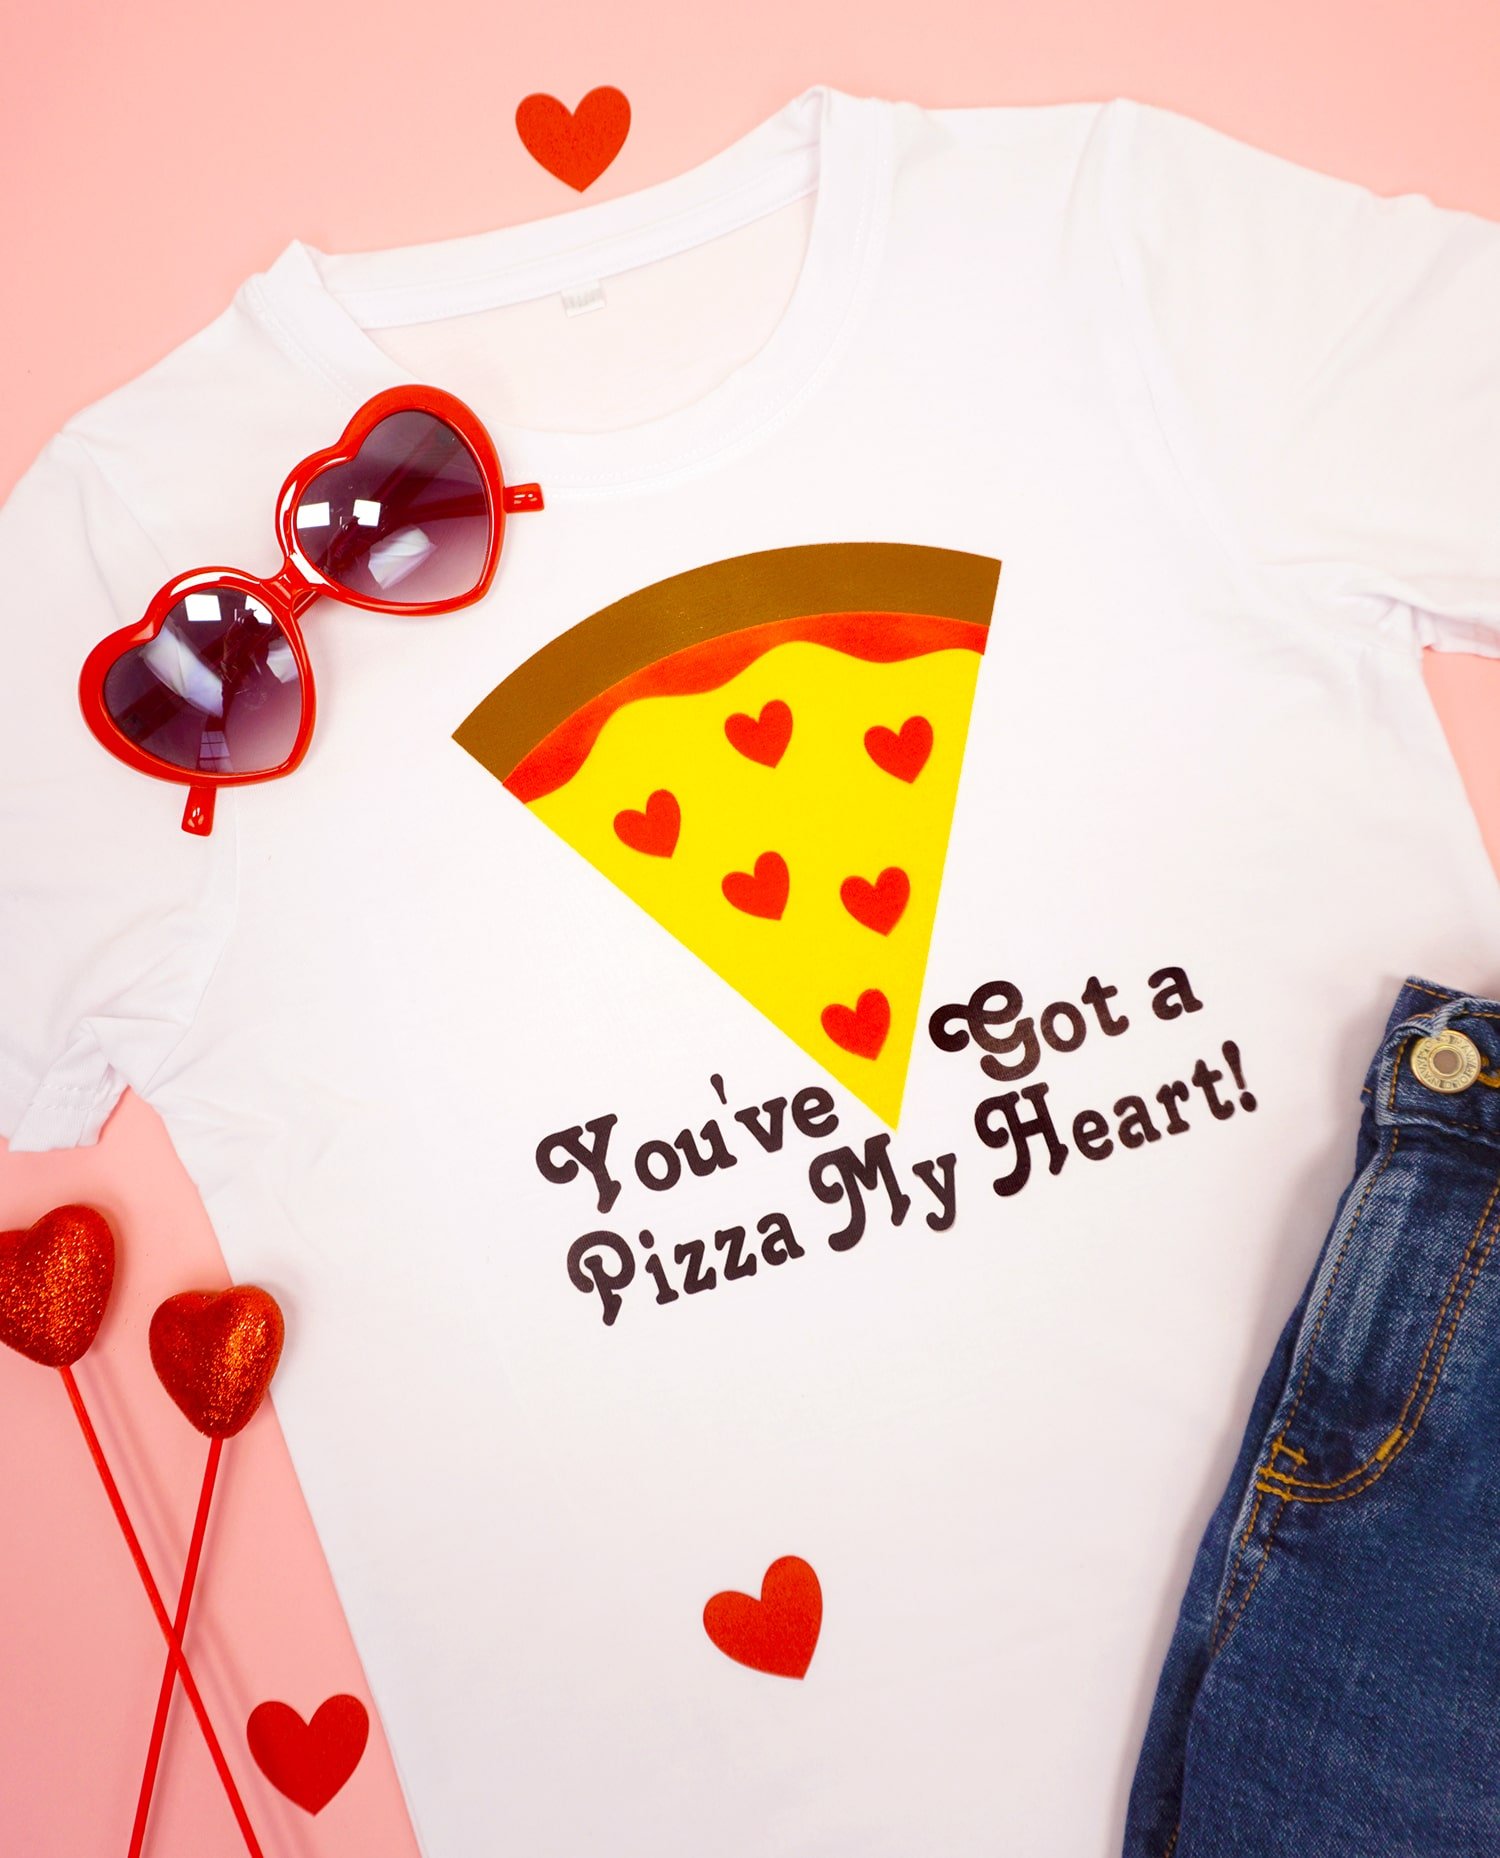 youve got a pizza my heart svg file on tshirt